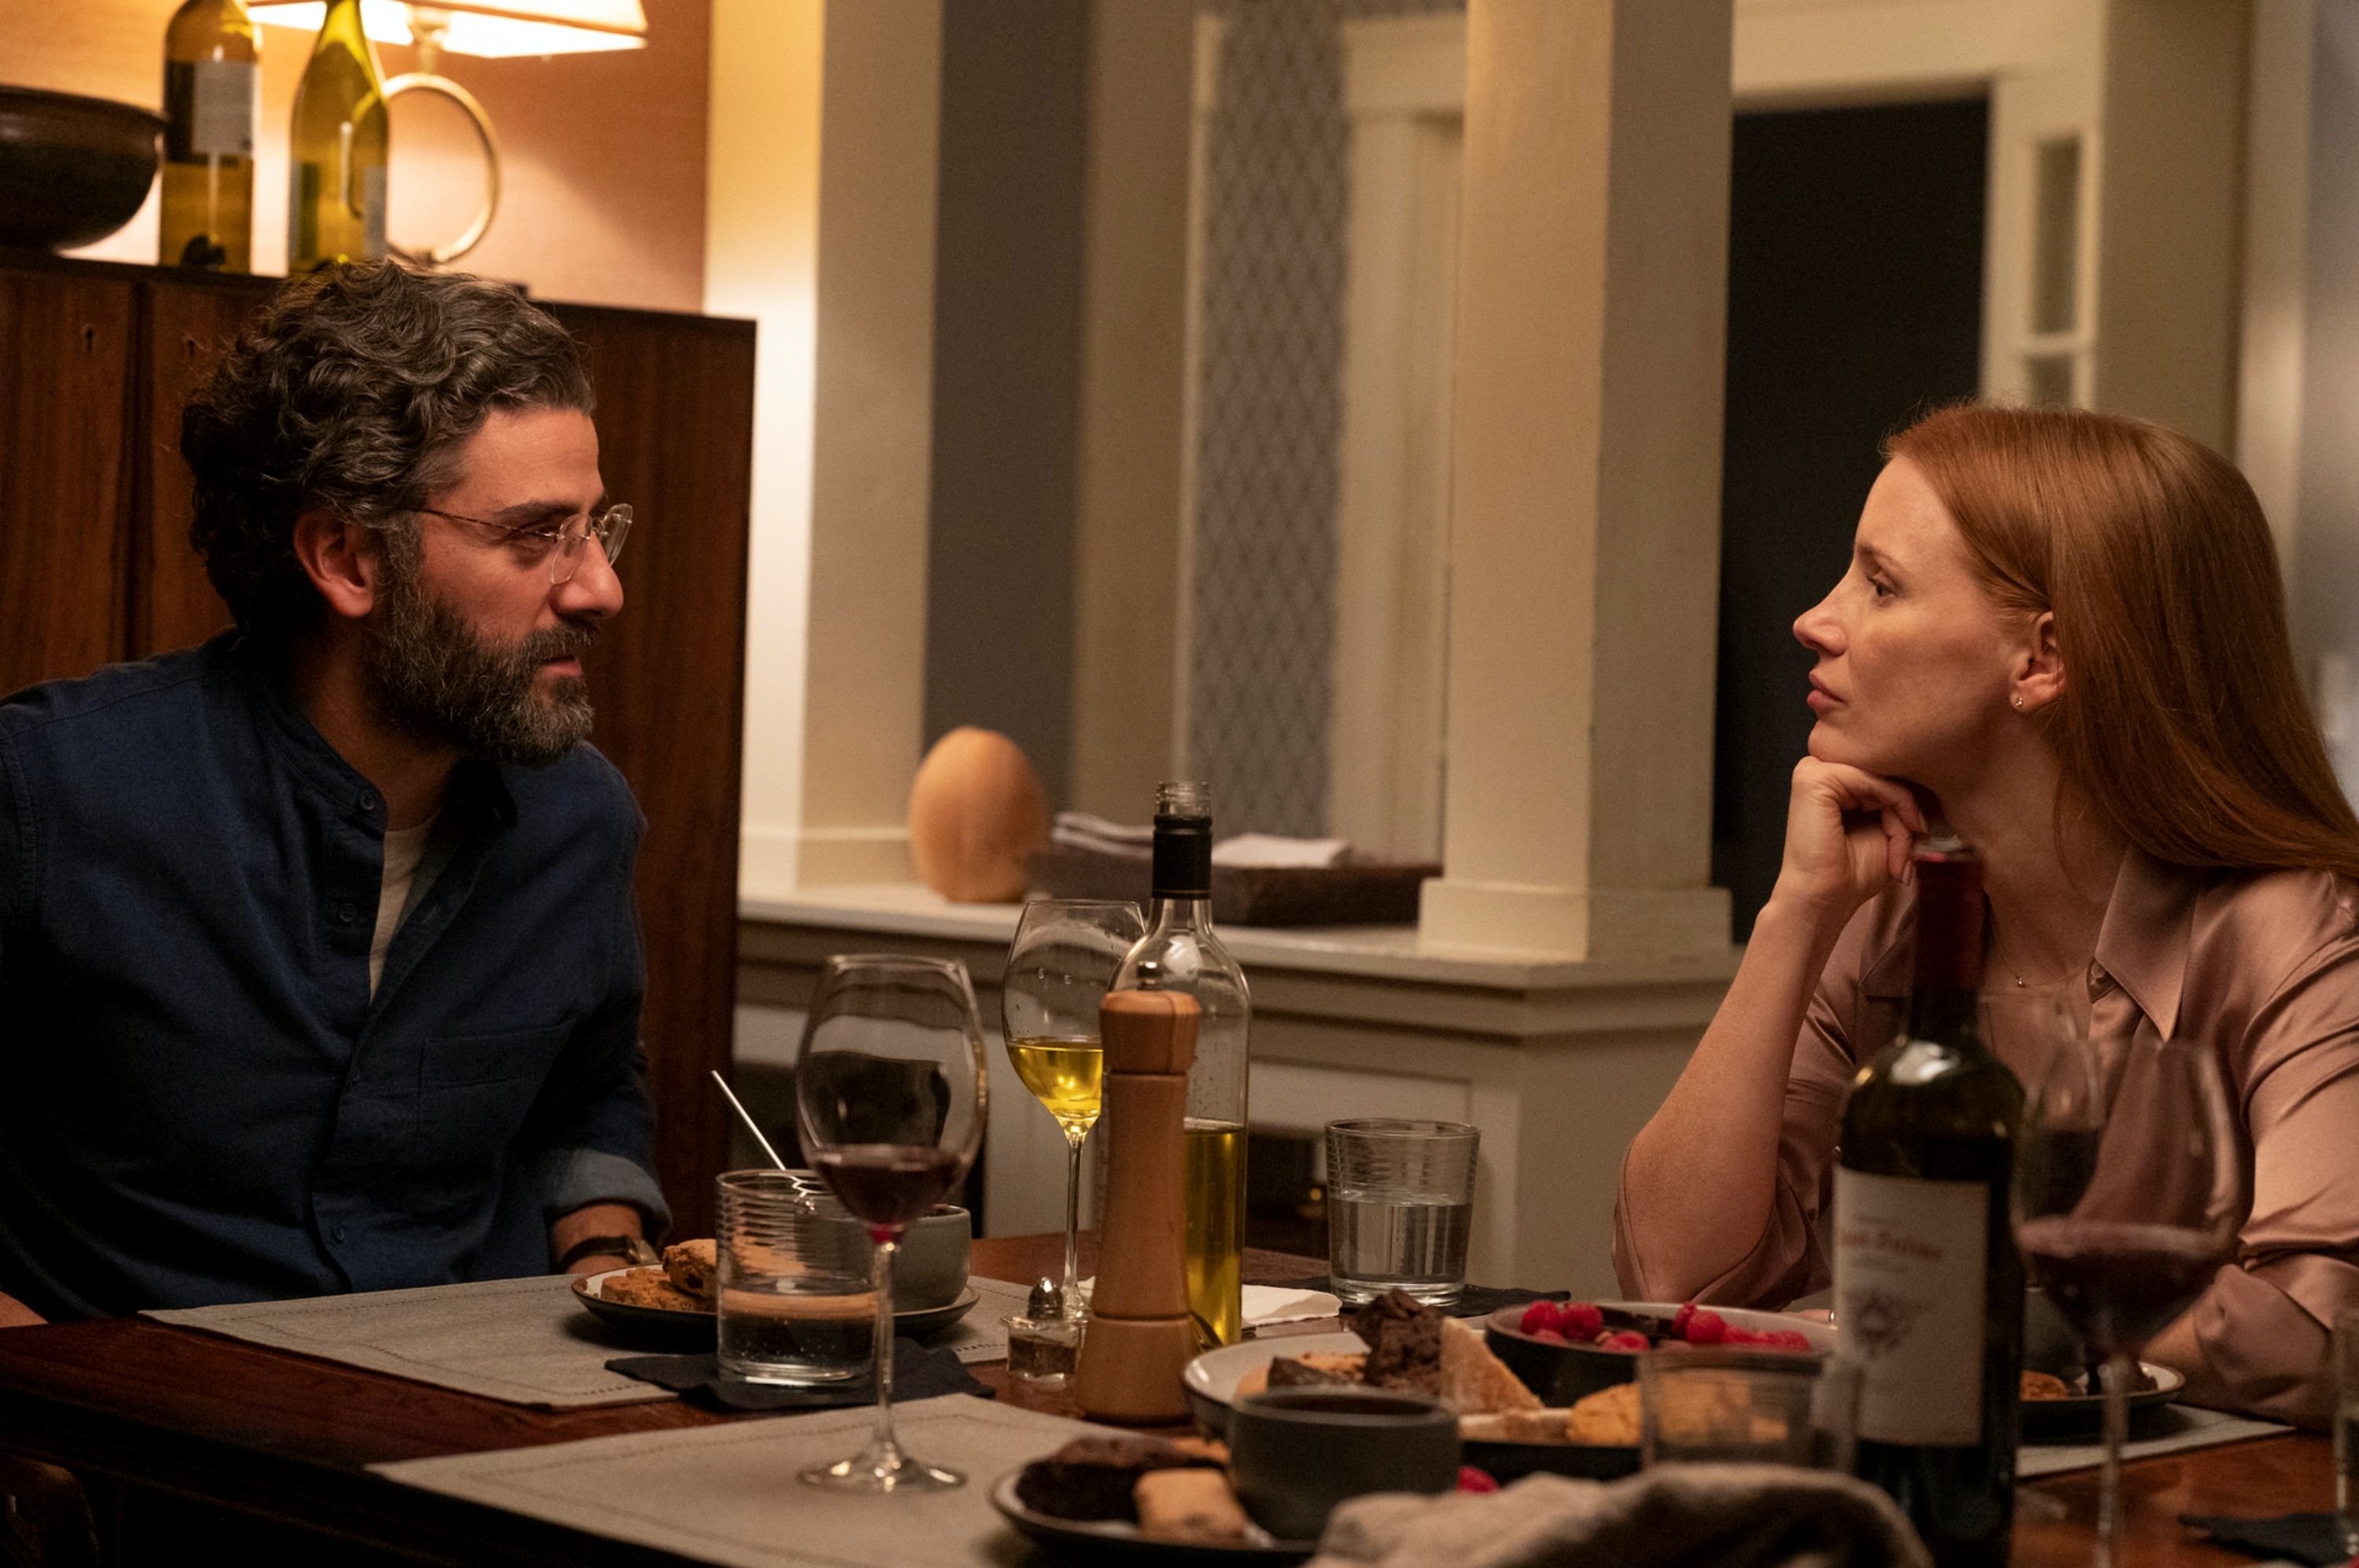 scenes-from-a-marriage-jessica-chastain-oscar-isaac-05